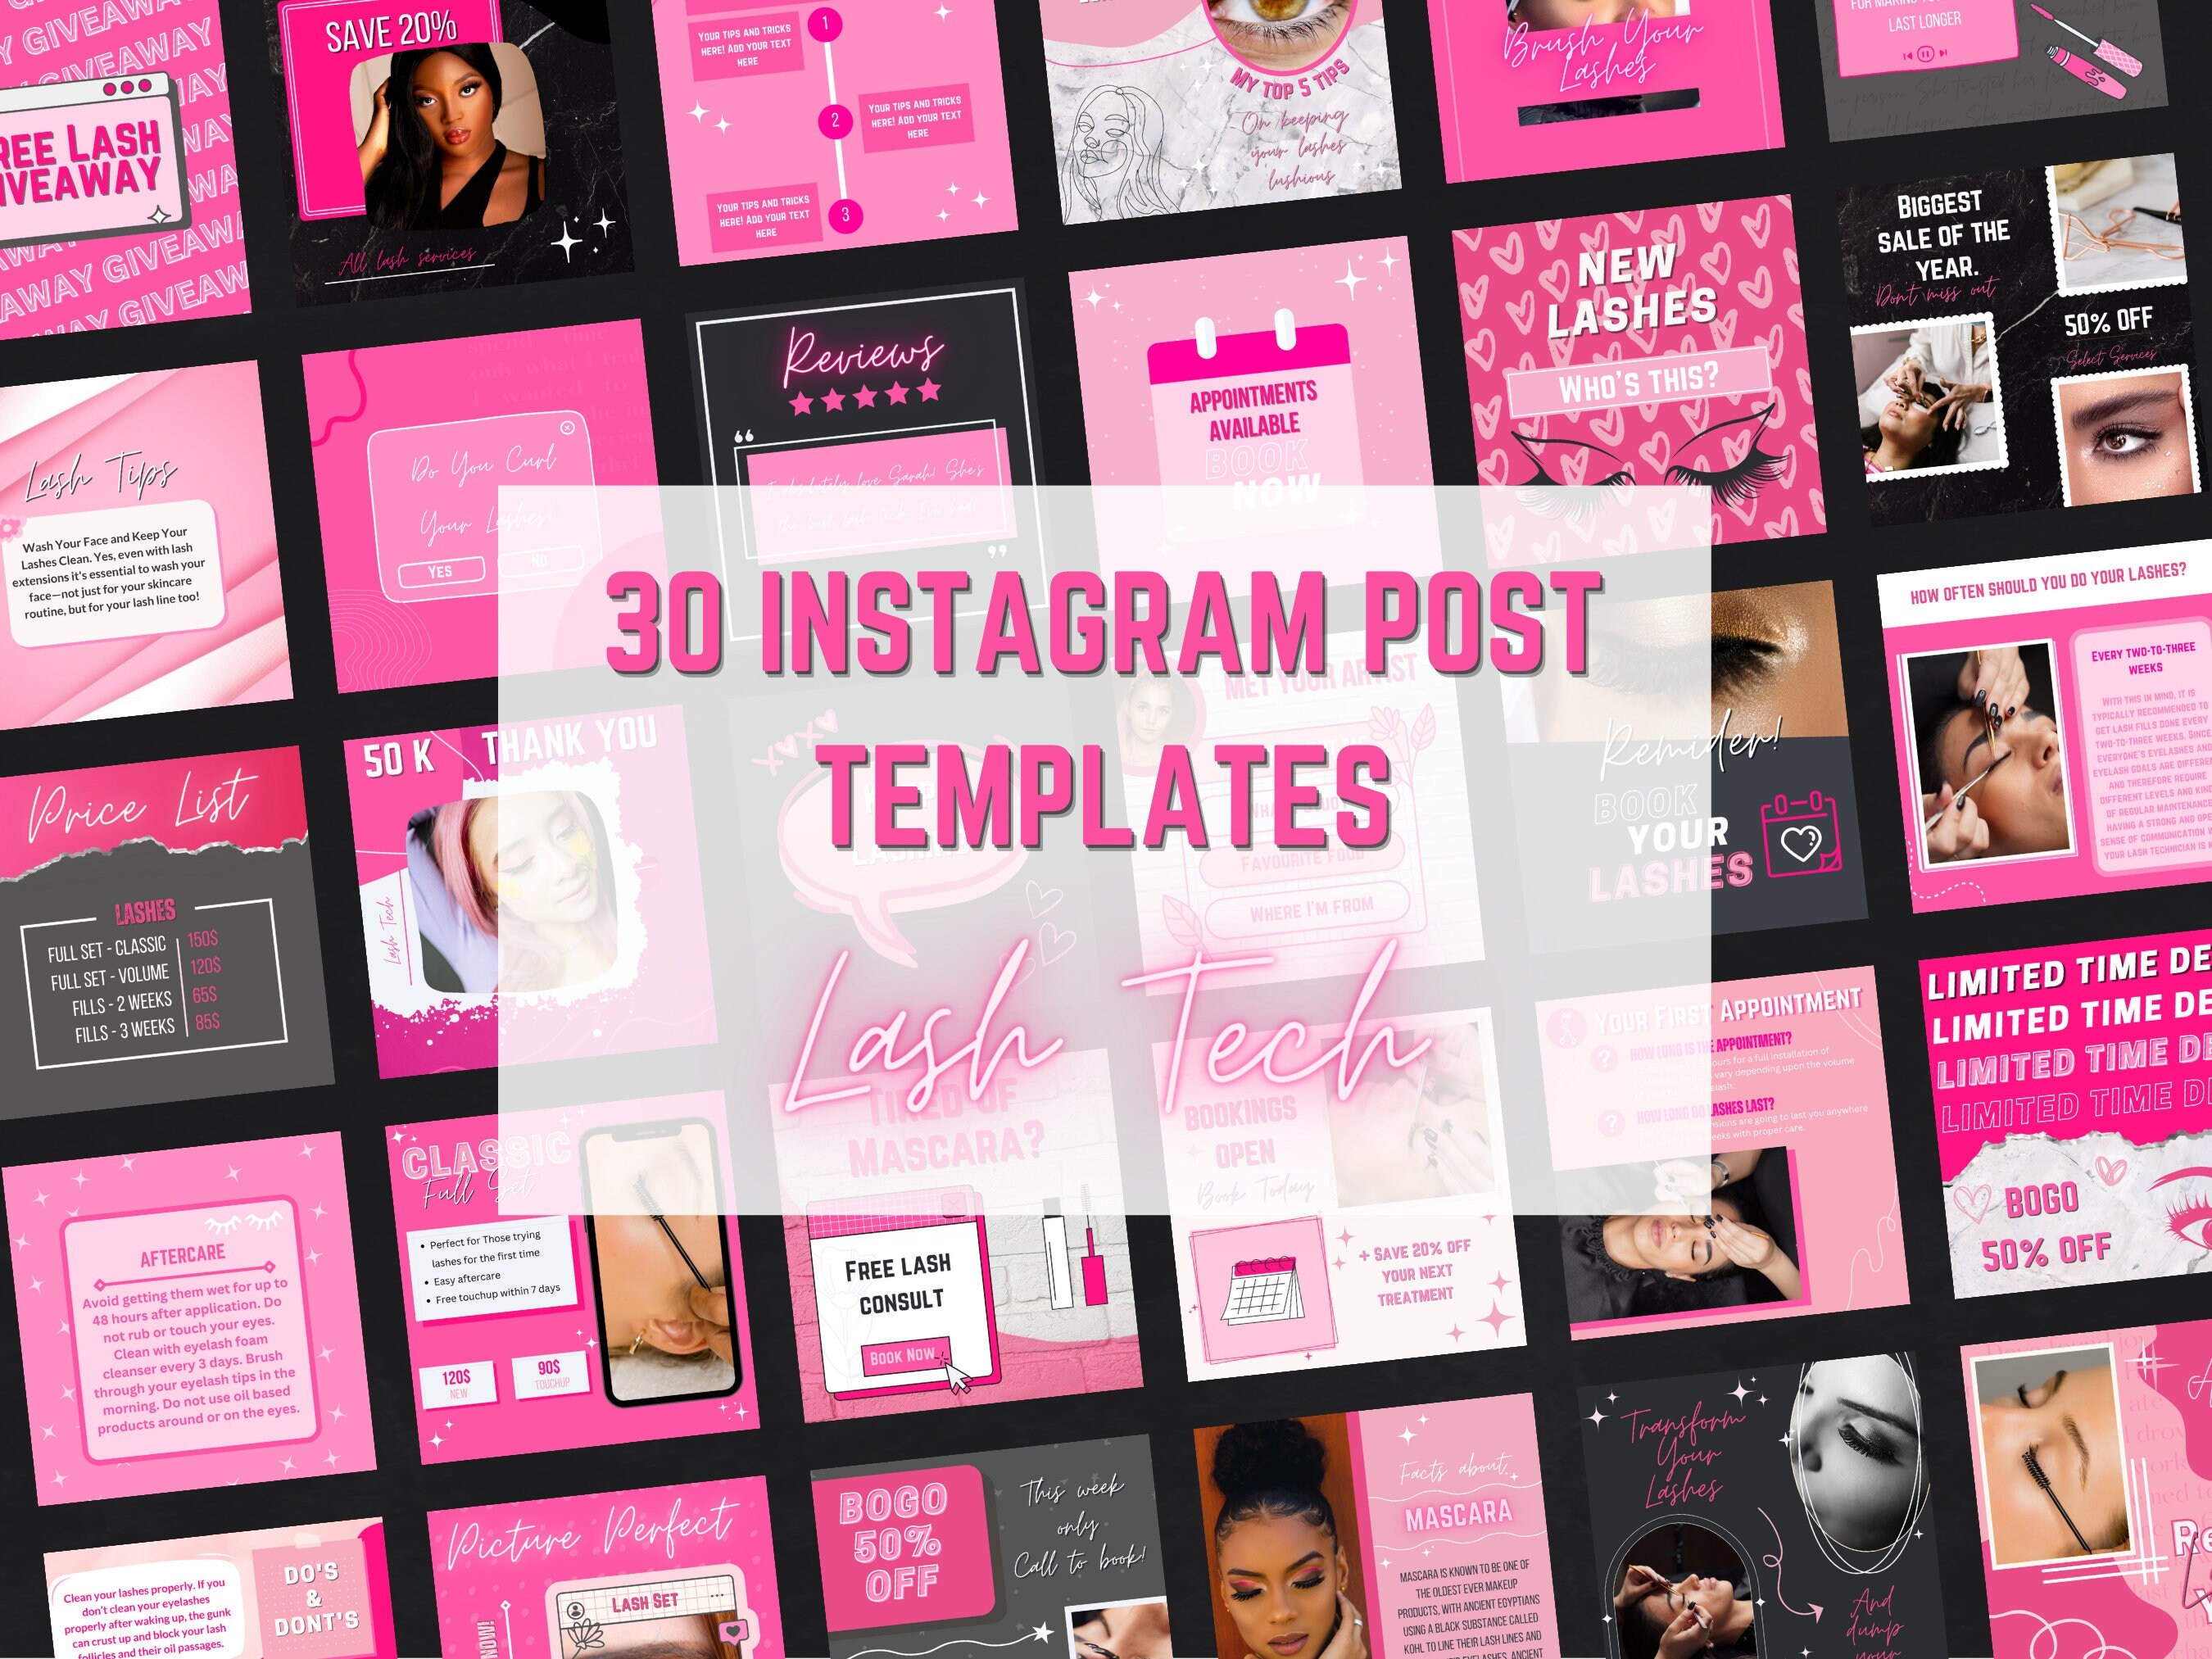 Pink Instagram Post Templates for Lash Techs, 30 Editable Canva Insta Post,  Influencer Social Media Design, Luxury Small Business Templates 